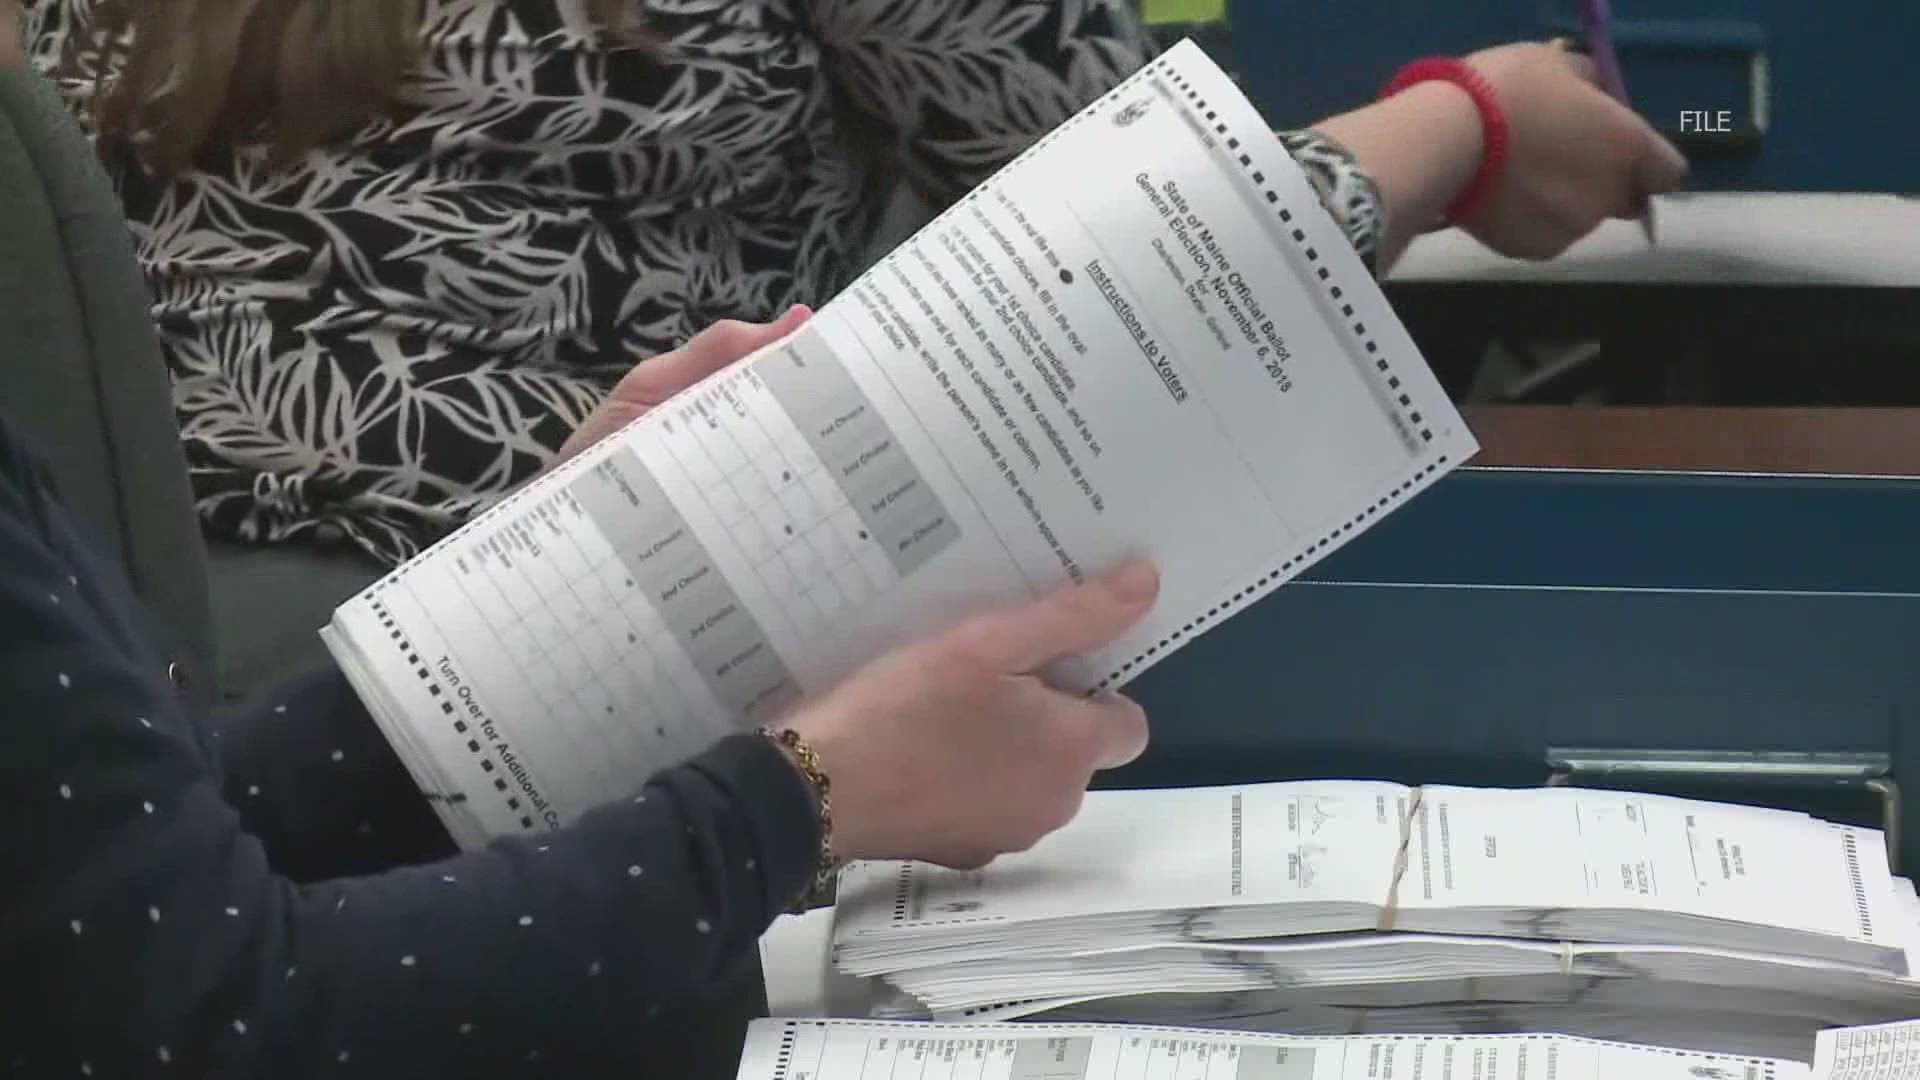 The Maine Supreme Court has ruled all ballots must be returned by Election Day.